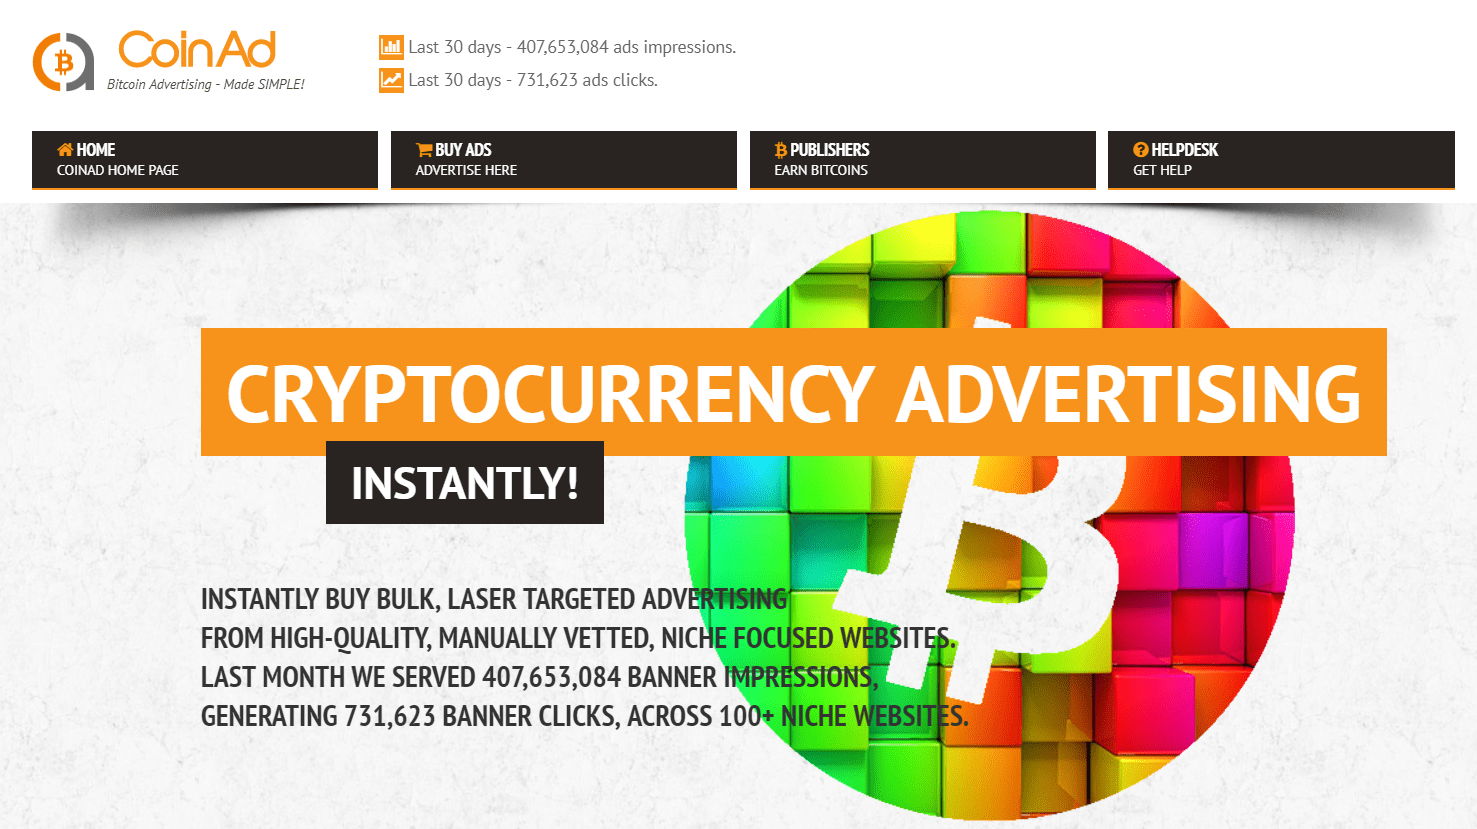 Best Crypto Ad Network - CoinAd